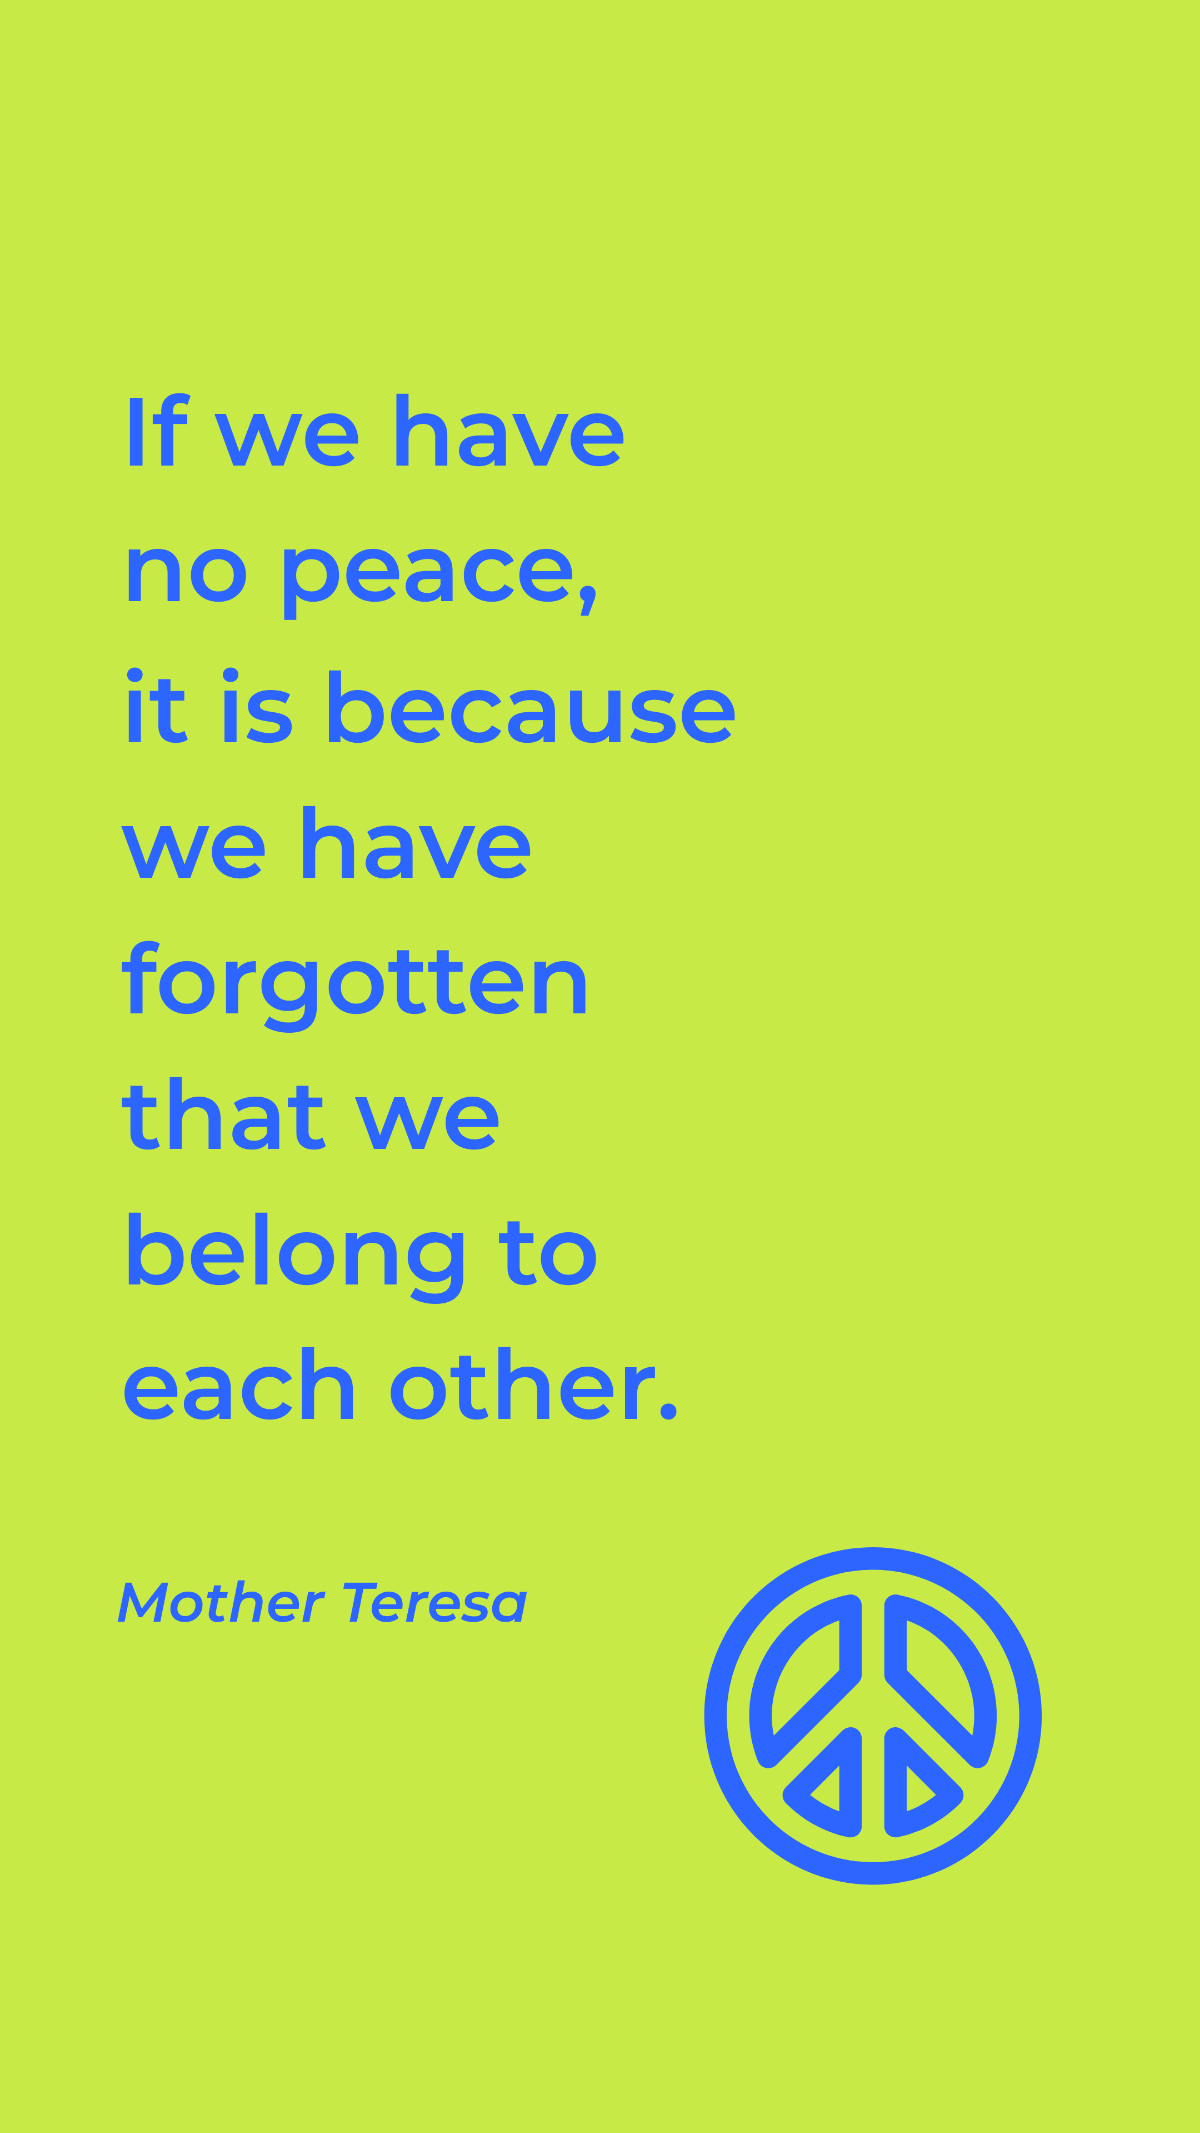 Mother Teresa - If we have no peace, it is because we have forgotten that we belong to each other.